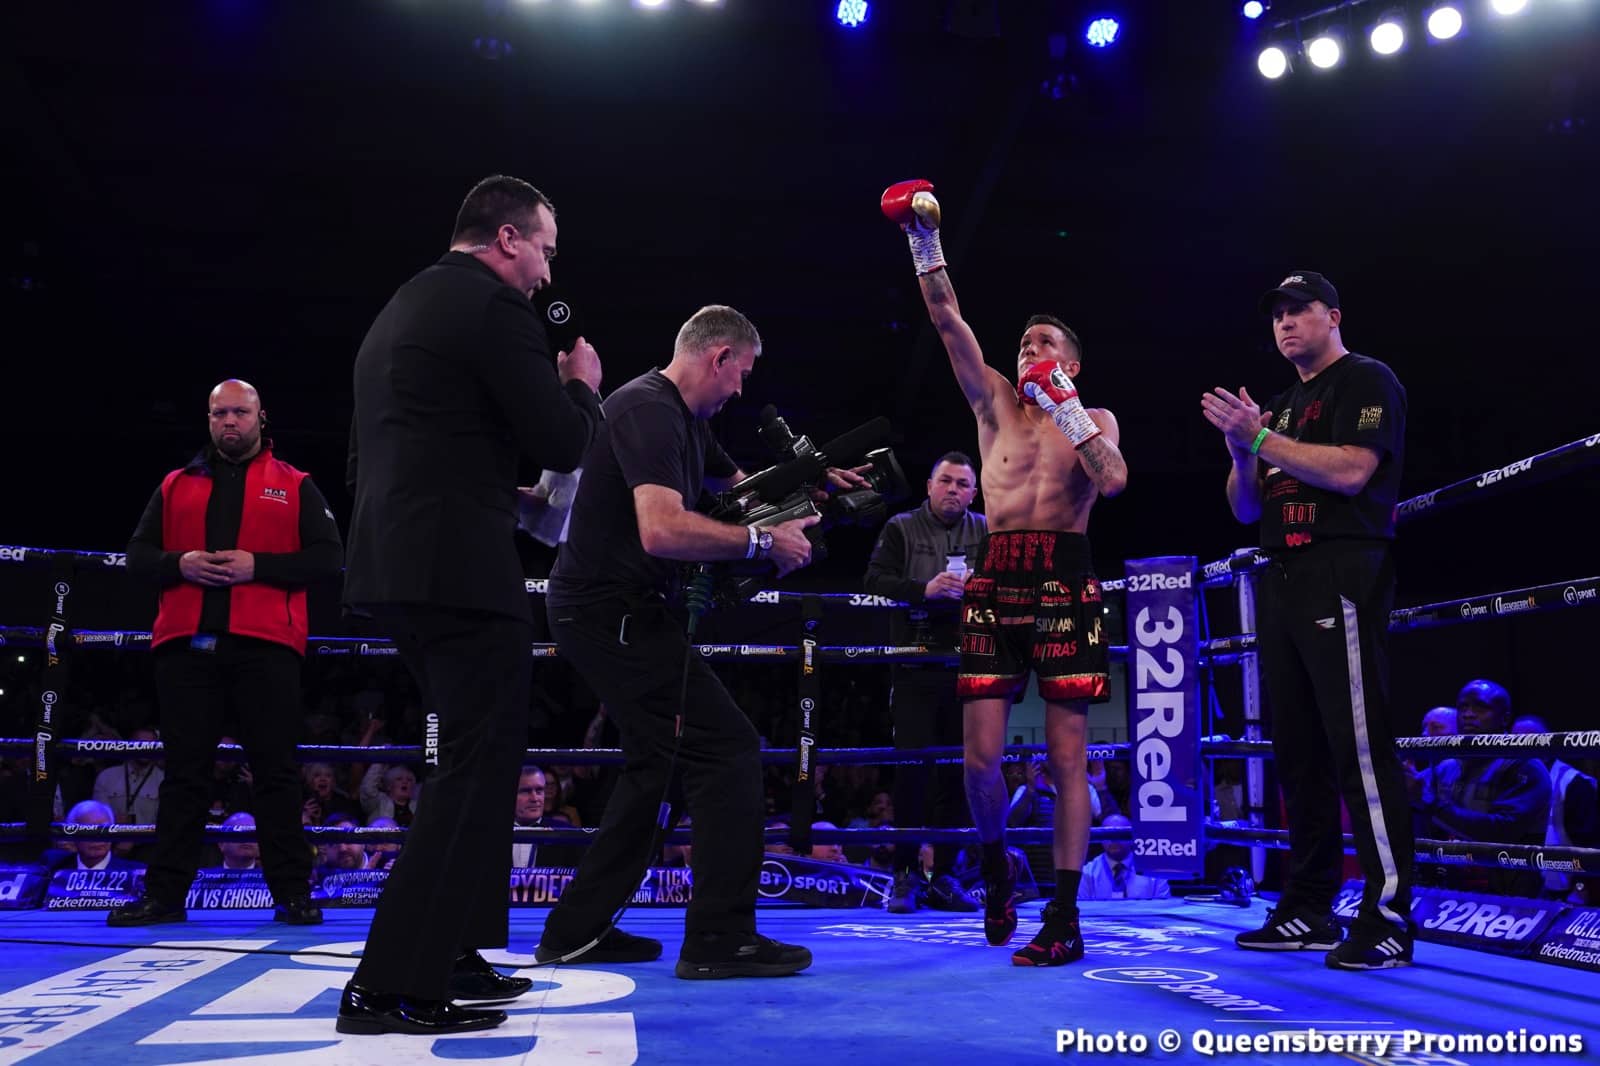 Liam Davies decisions Ionut Baluta - Boxing Results